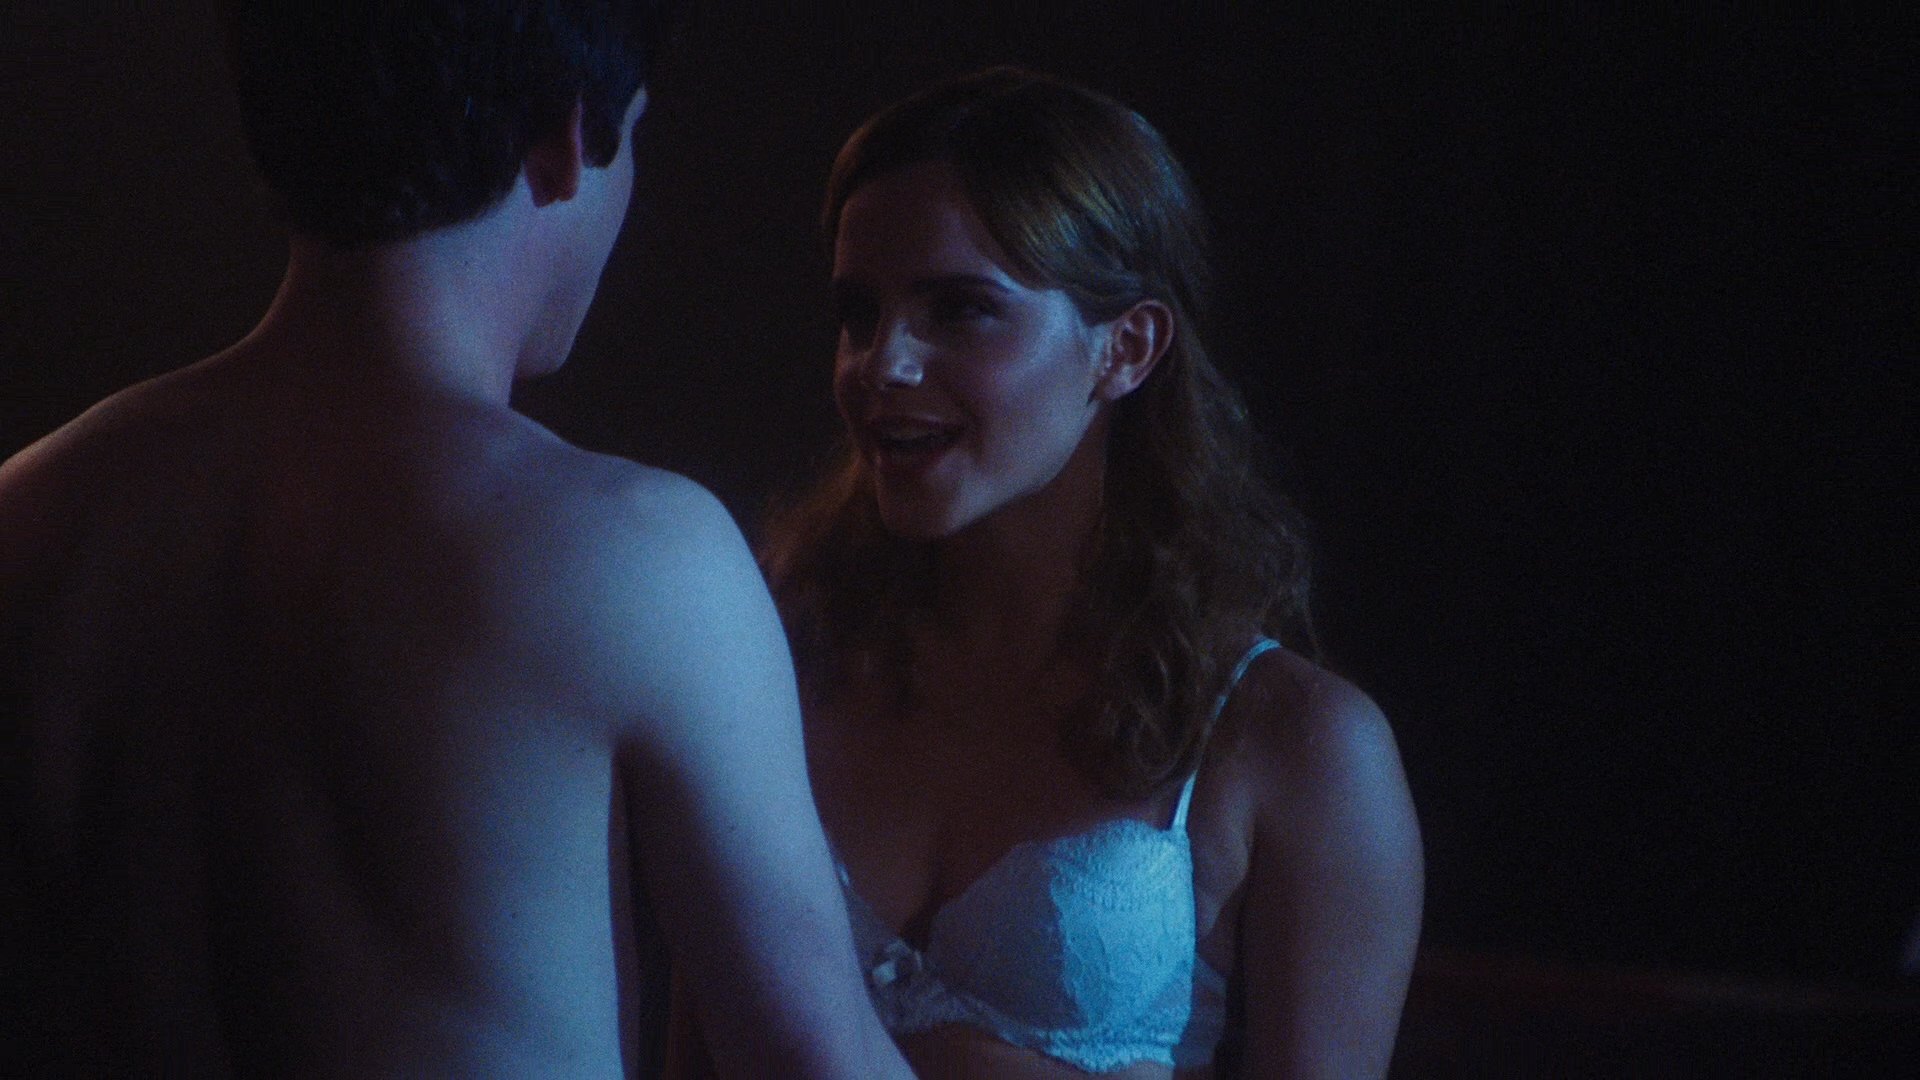 The Perks of Being a Wallflower nude pics.